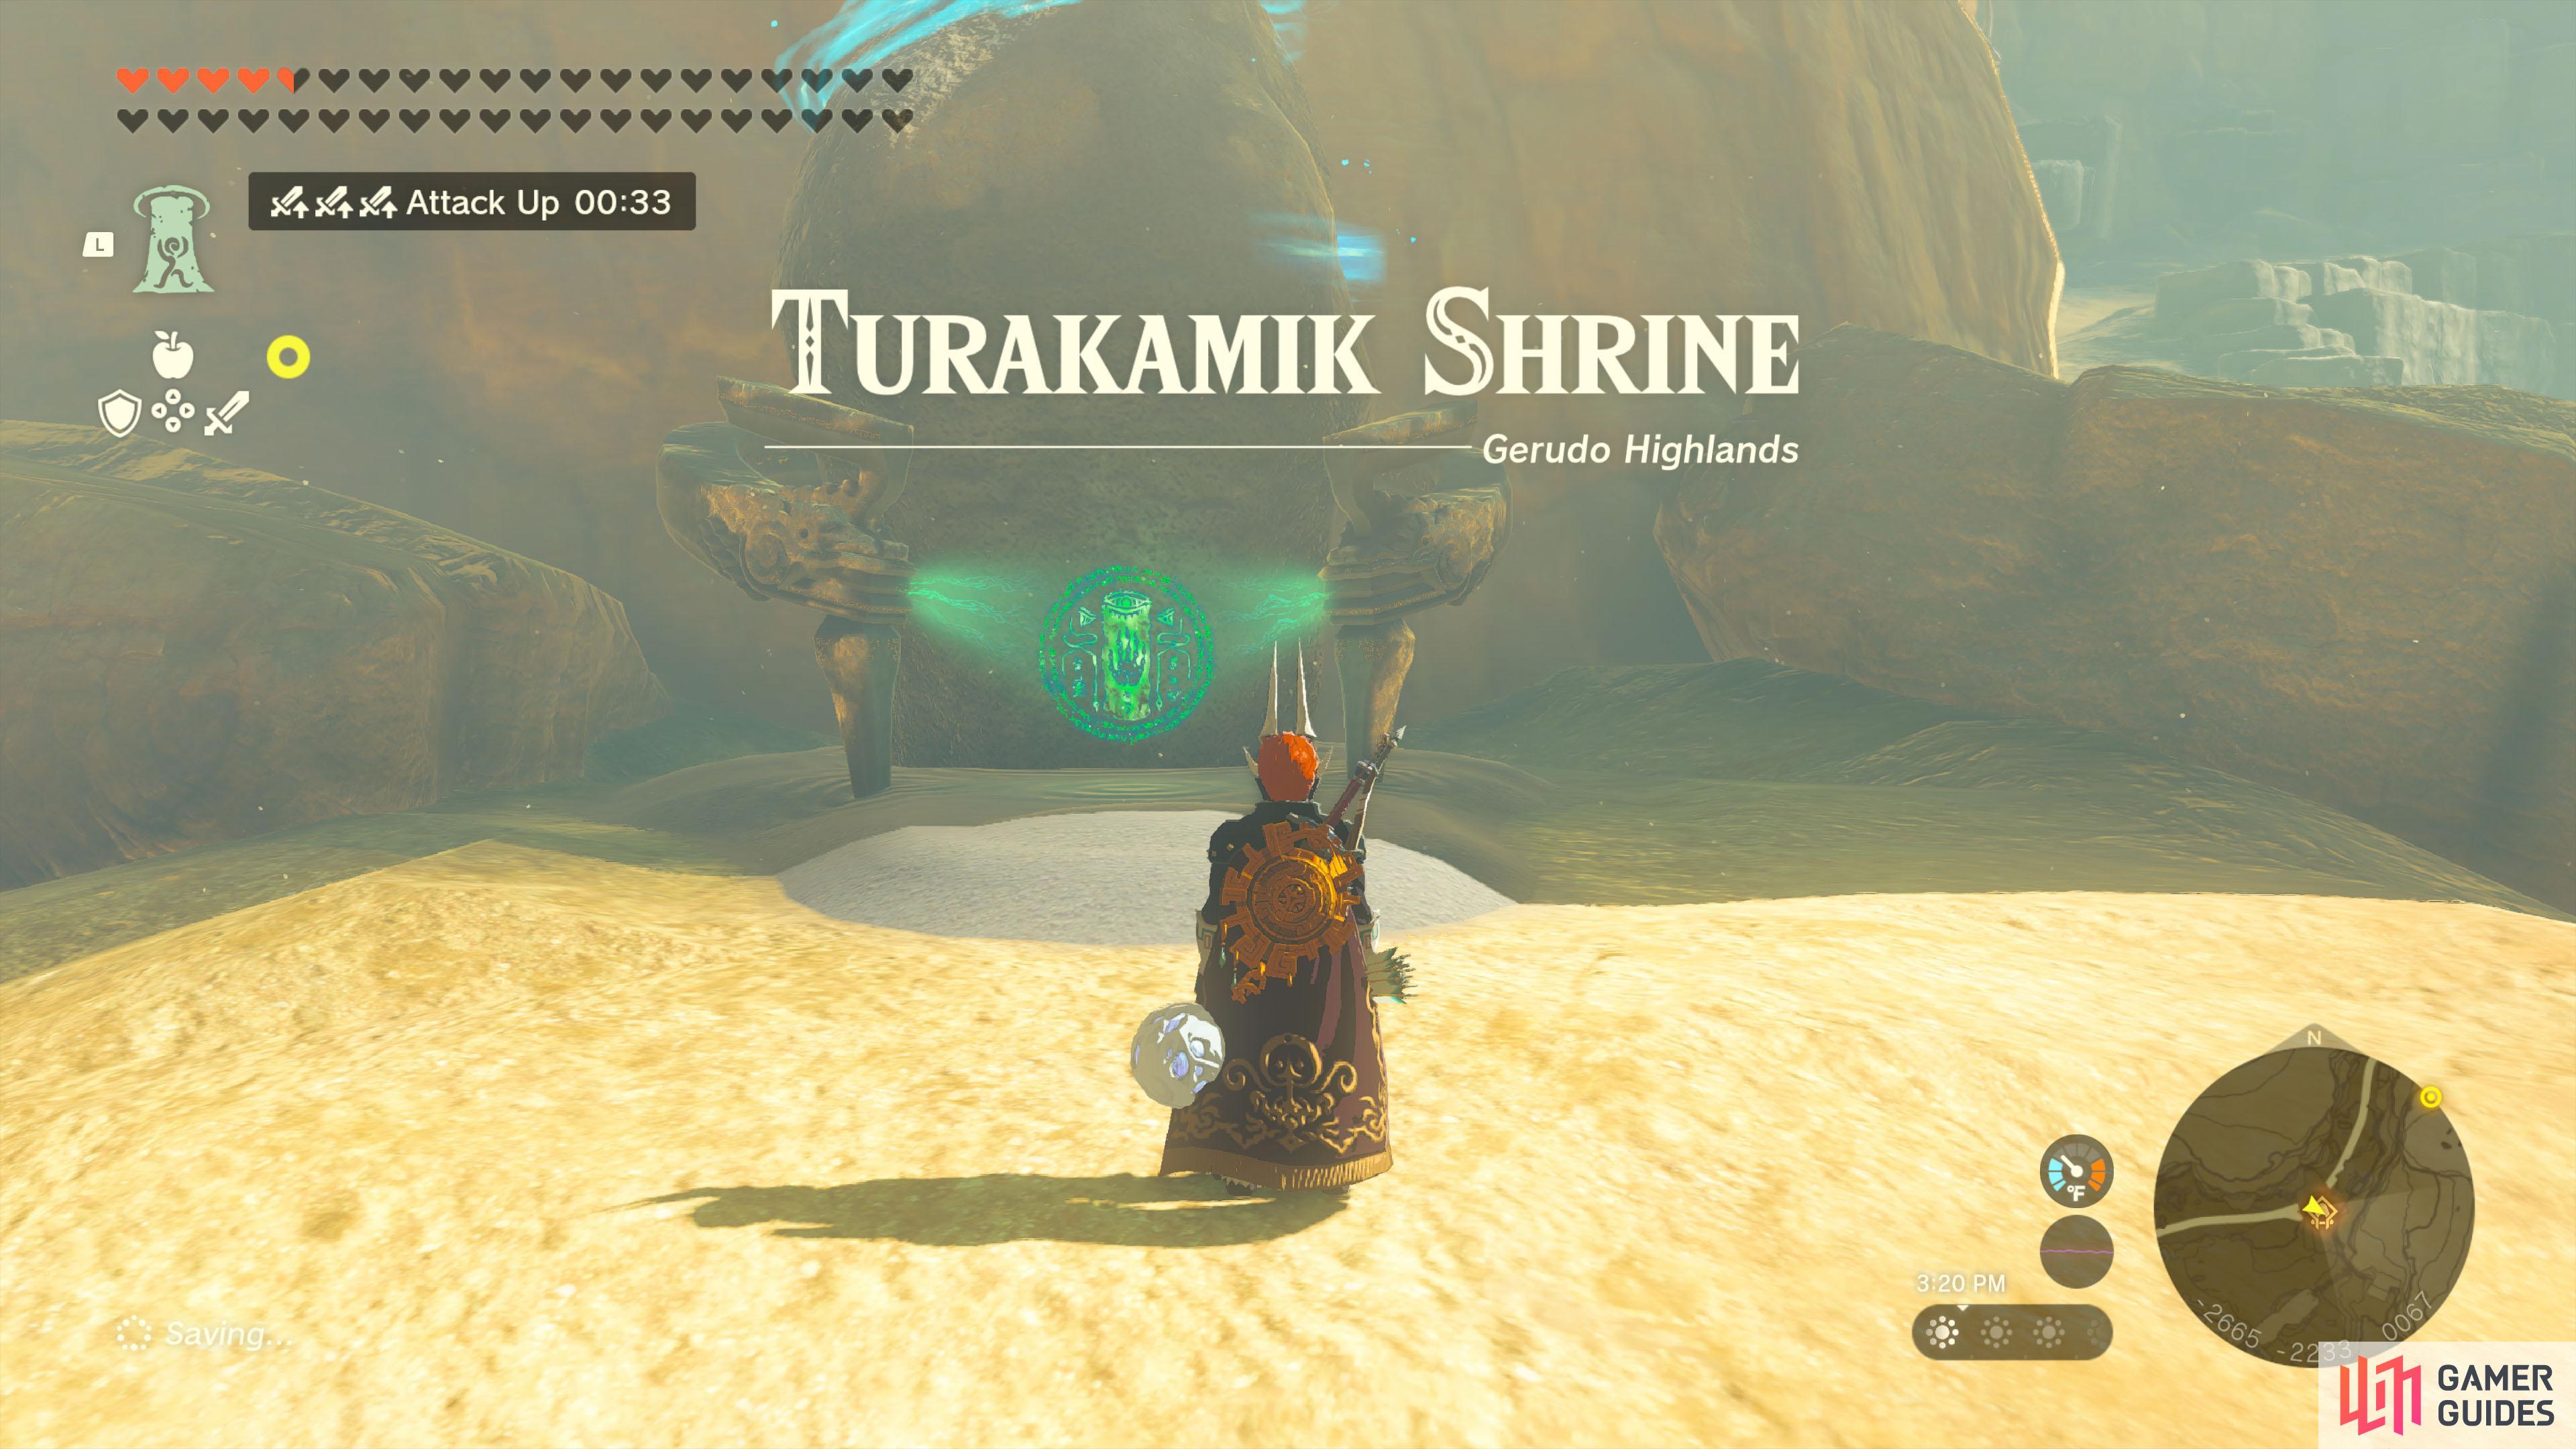 The Turakamik Shrine is located on a rock near the Gerudo Canyon Stable.